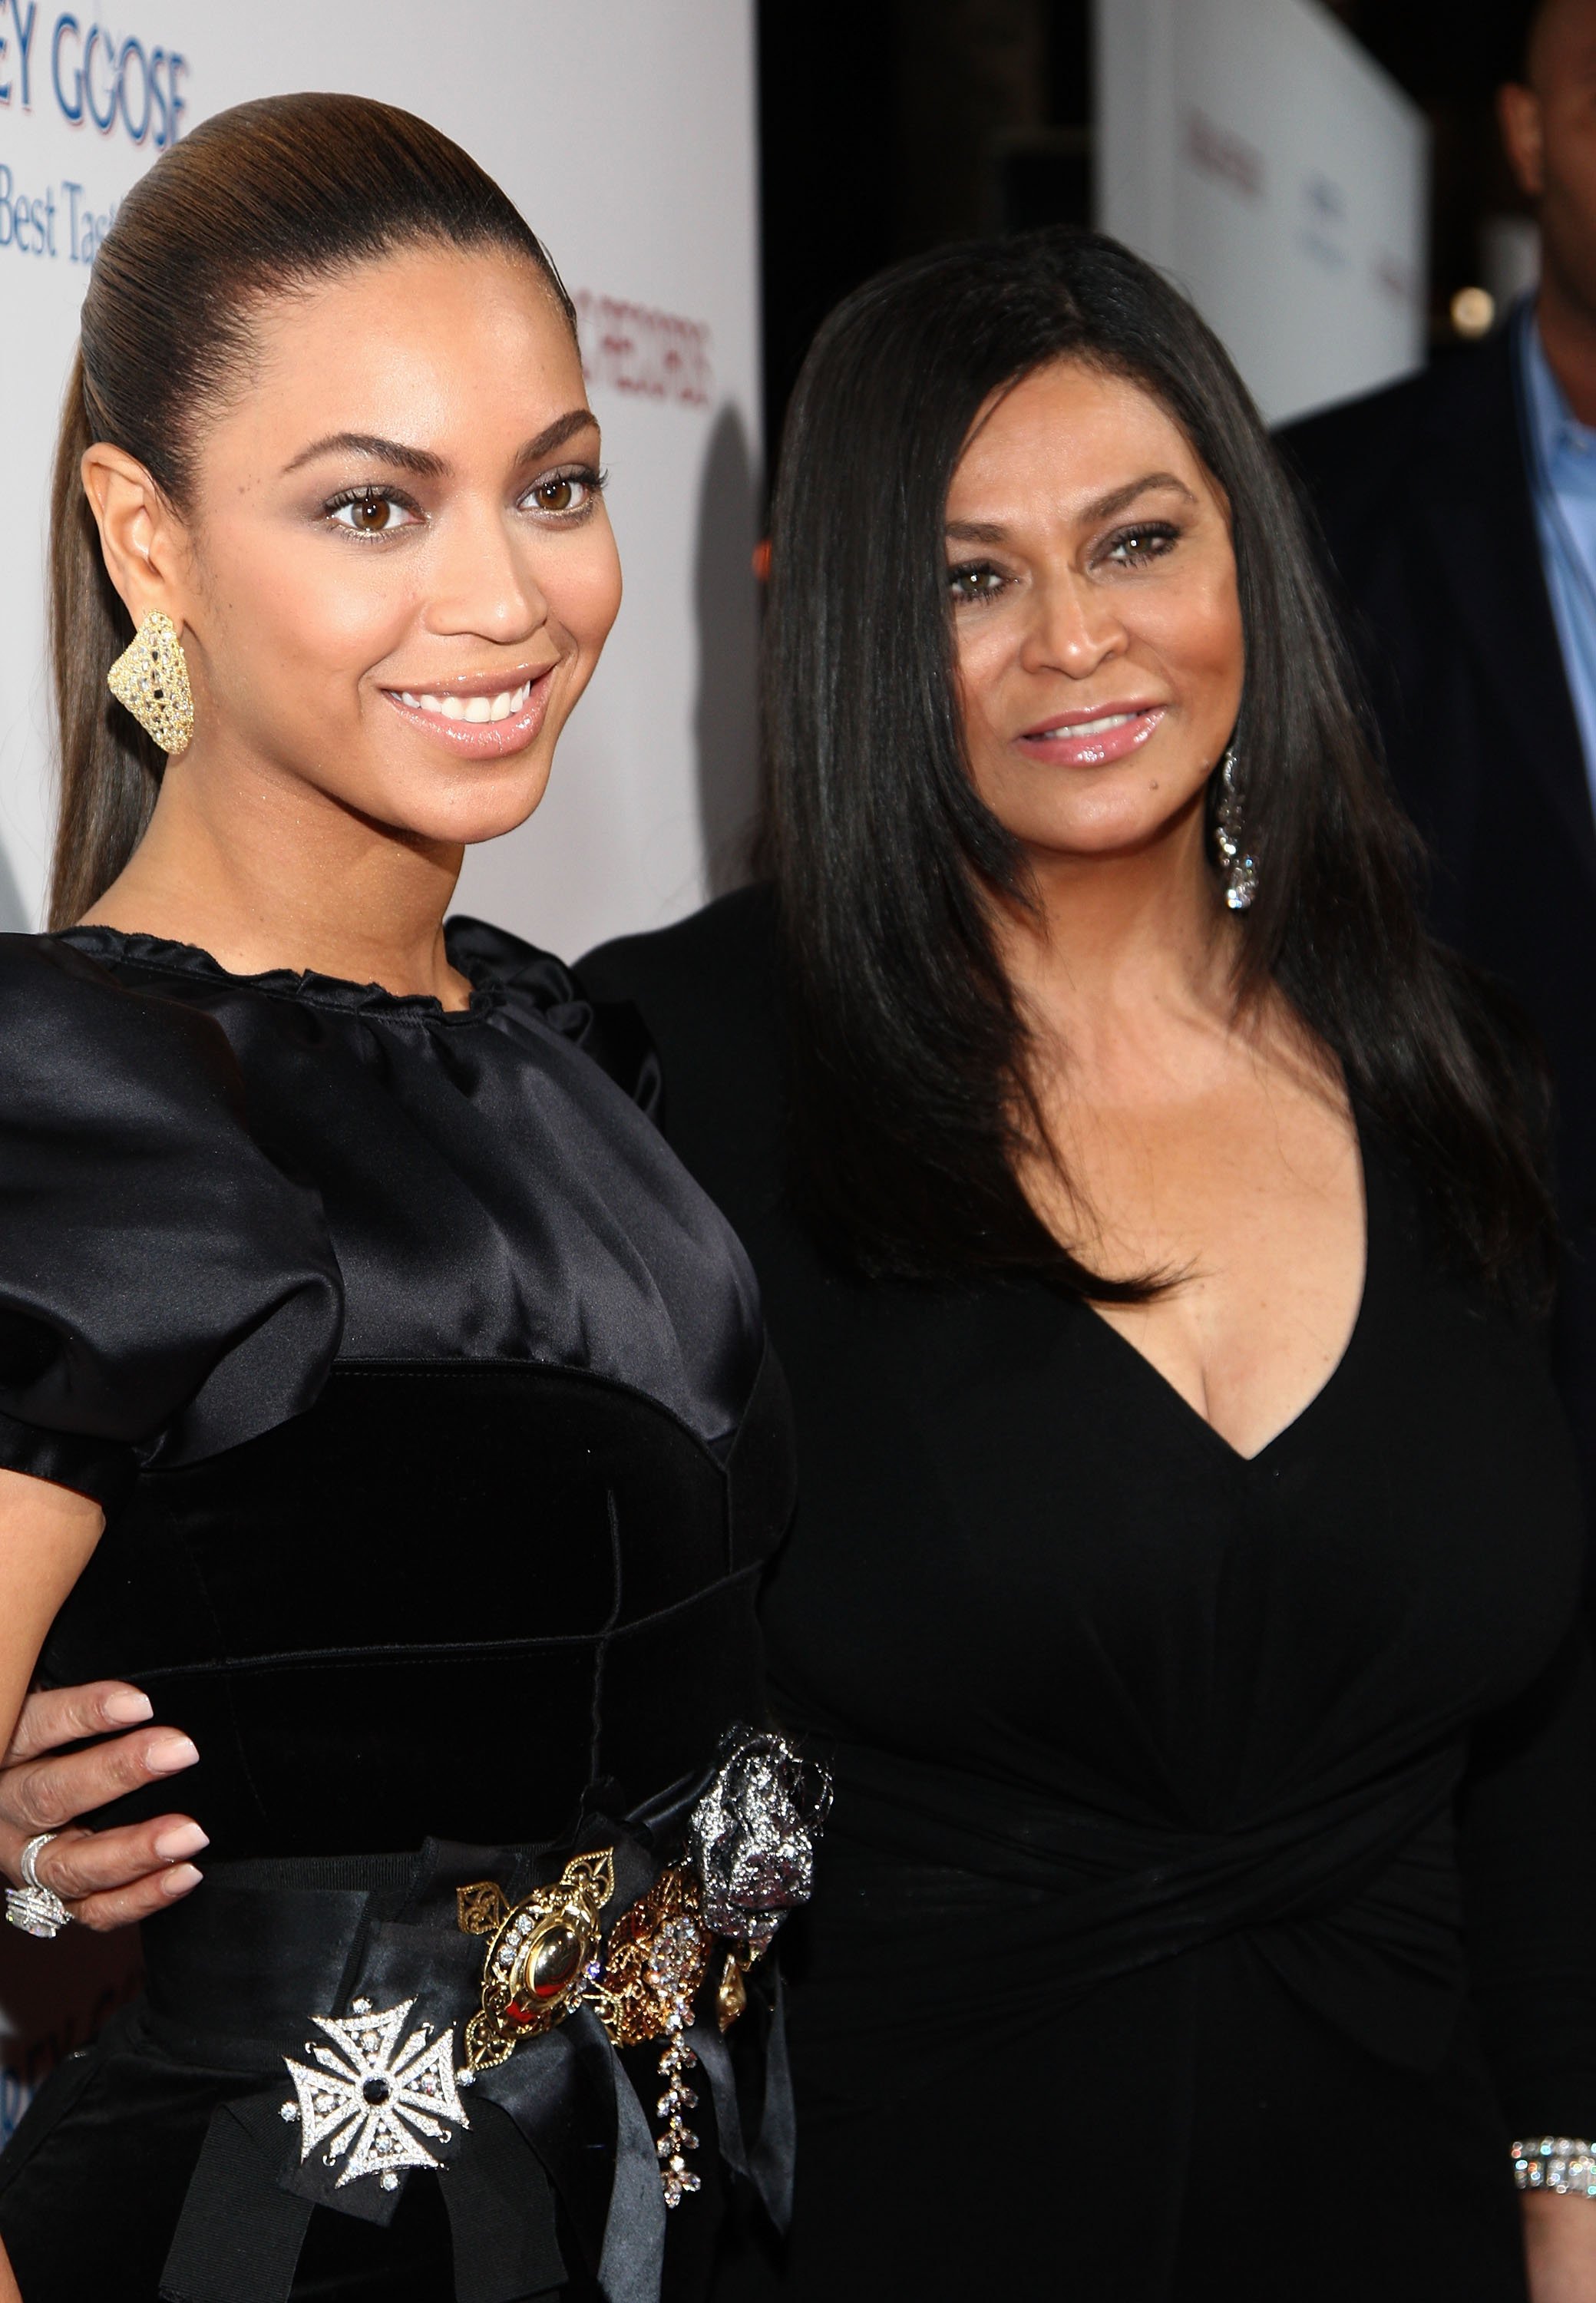 Beyoncé & Tina Lawson at the premiere of "Cadillac Records" in Hollywood on Nov. 24, 2008. | Photo: Getty Images.